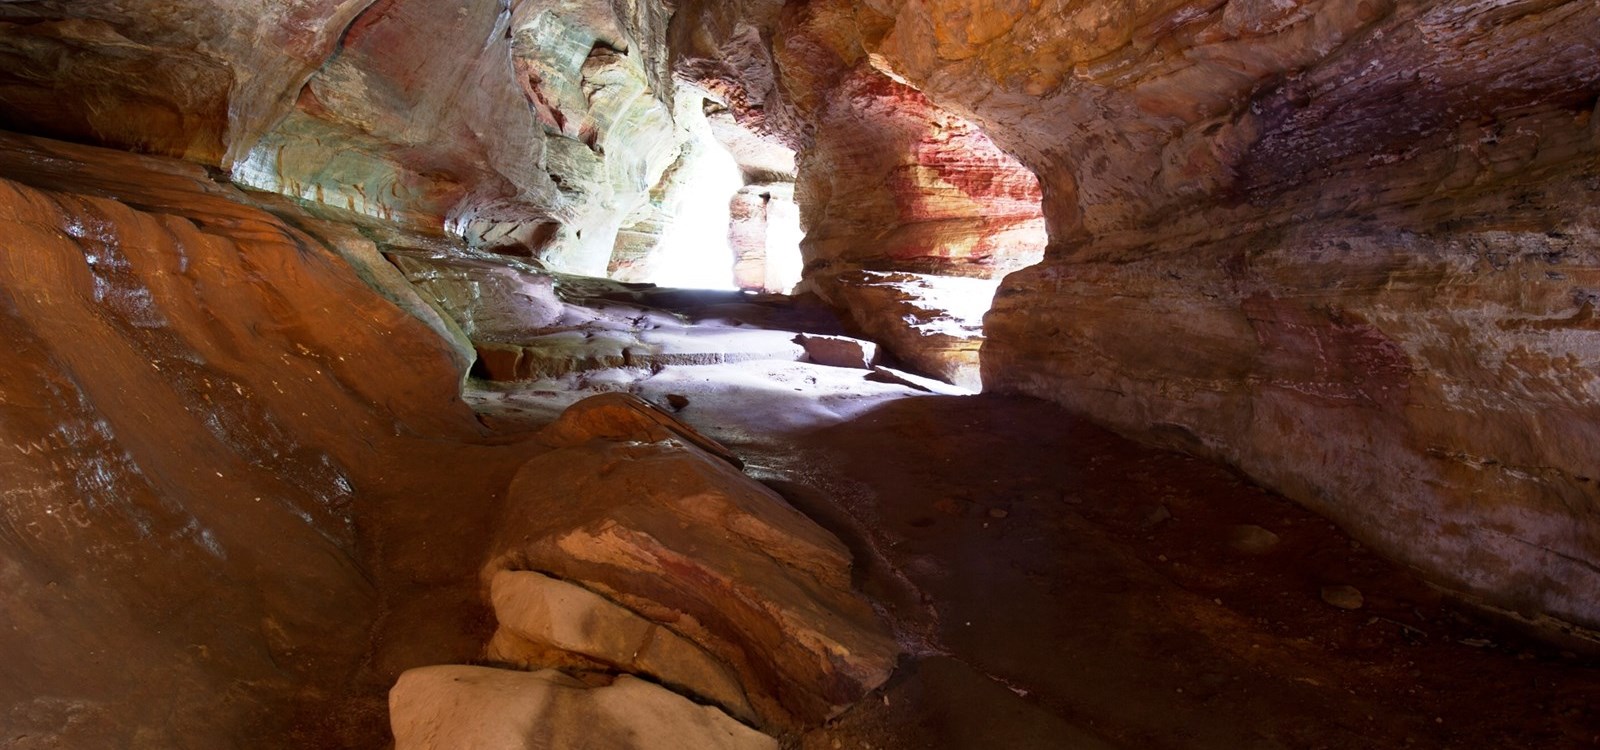 25 Family Vacations for Active Kids (Hocking Hills, OH)